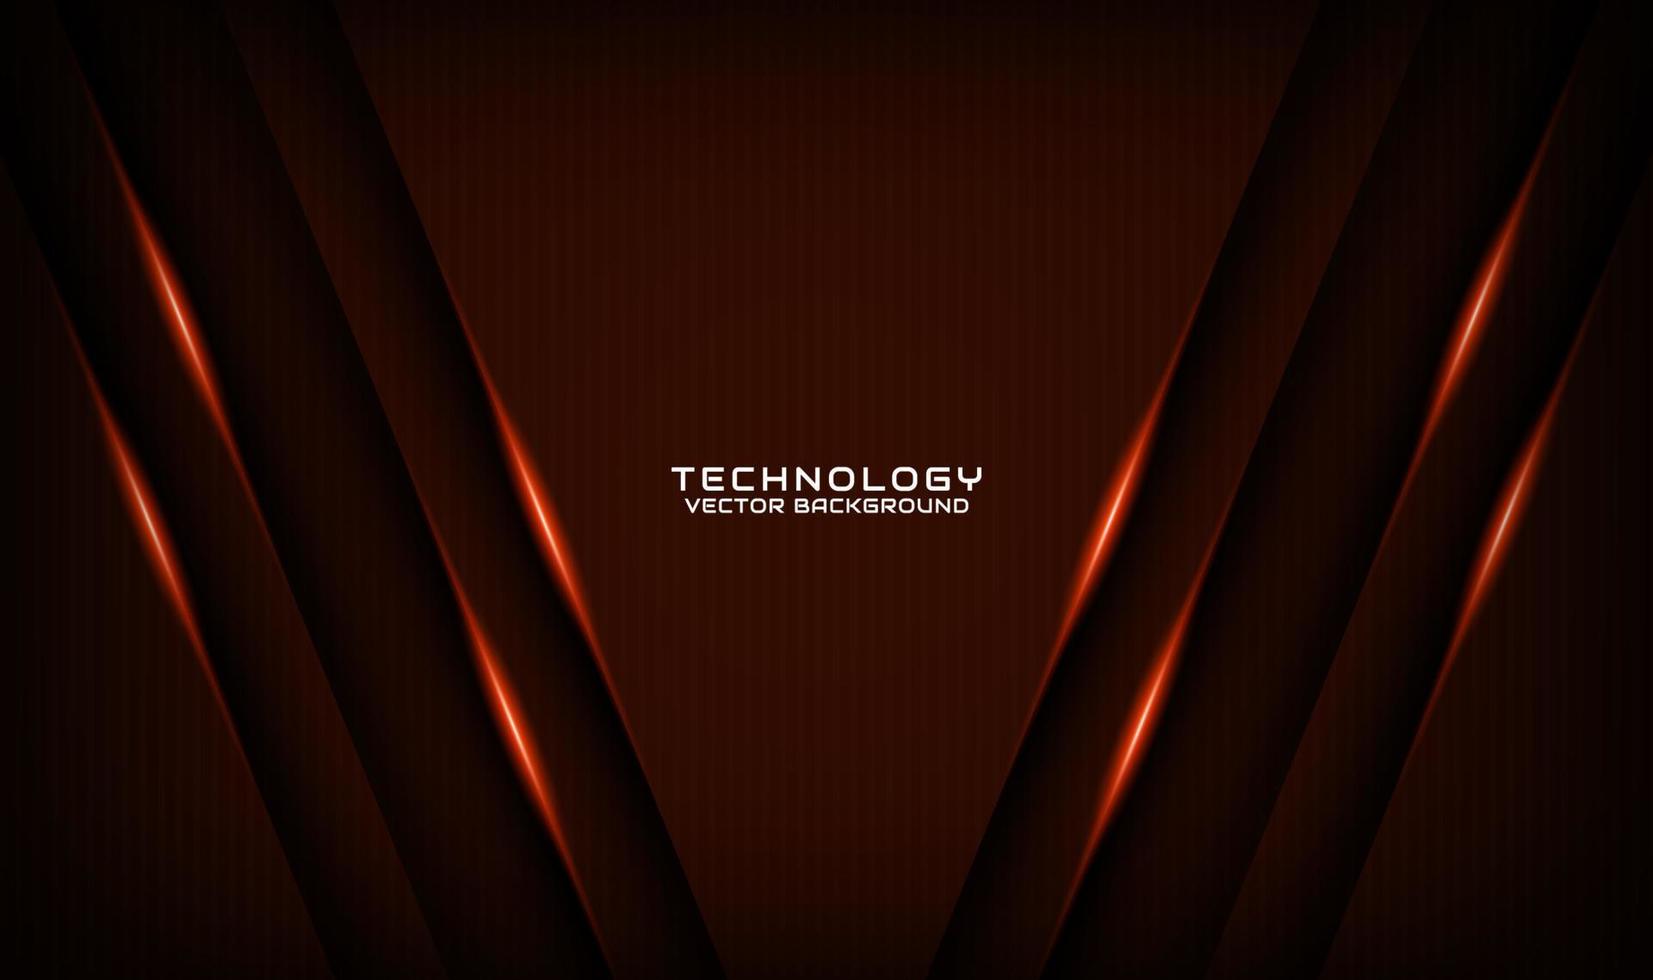 3D brown technology abstract background overlap layer on dark space with orange light effect decoration. Graphic design element future style concept for flyer, banner, brochure cover, or landing page vector